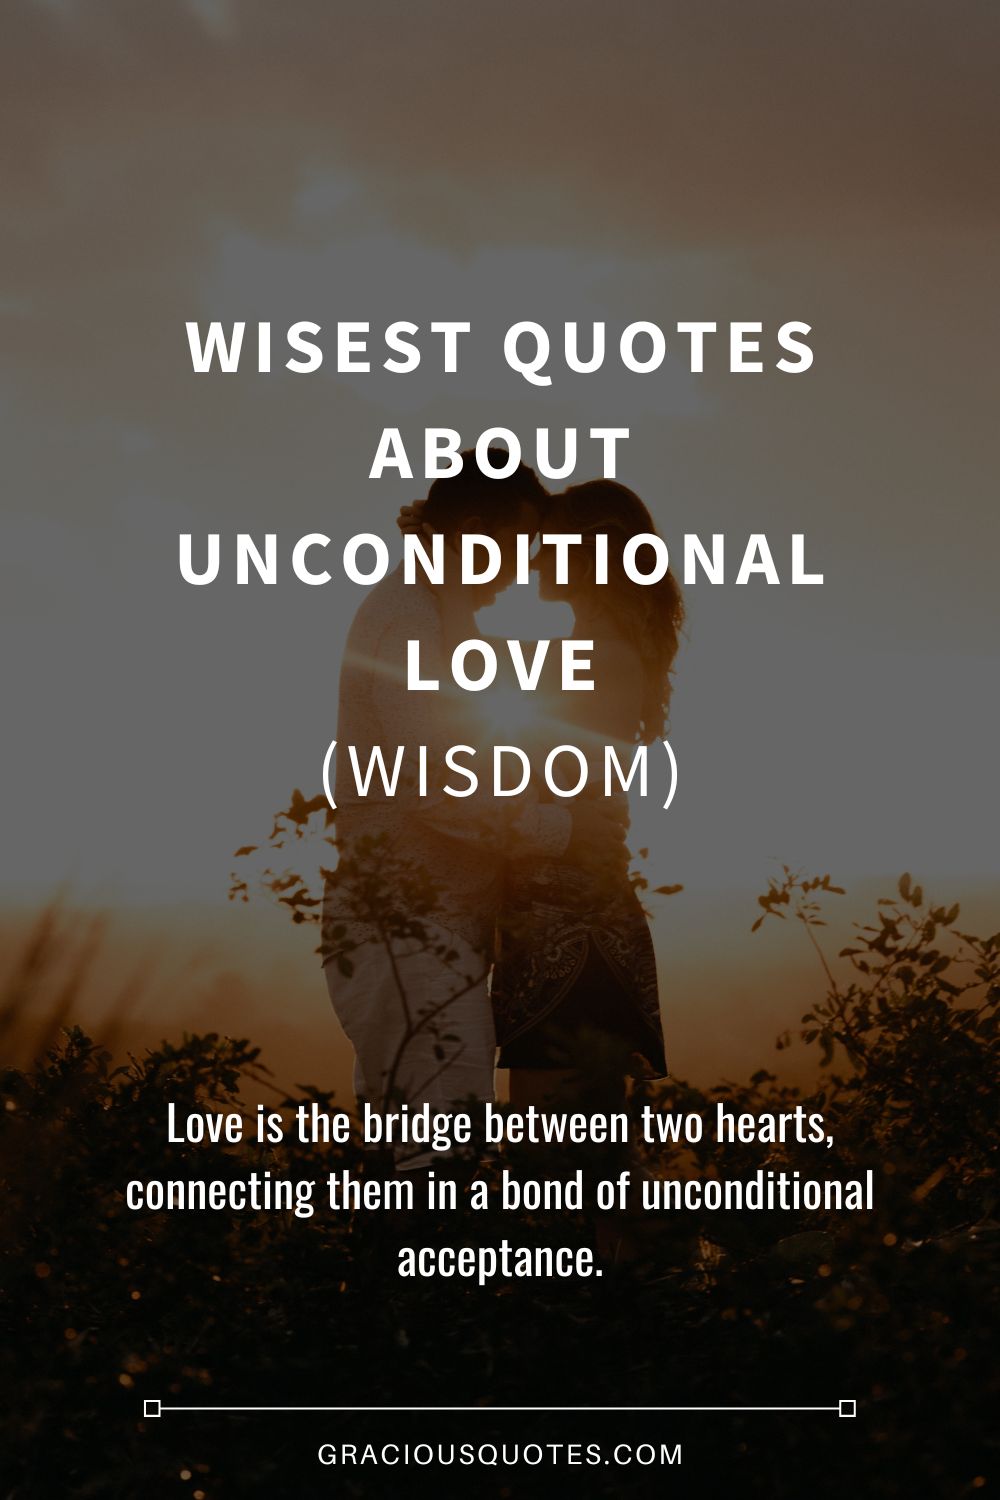 Wisest Quotes About Unconditional Love (WISDOM) - Gracious Quotes